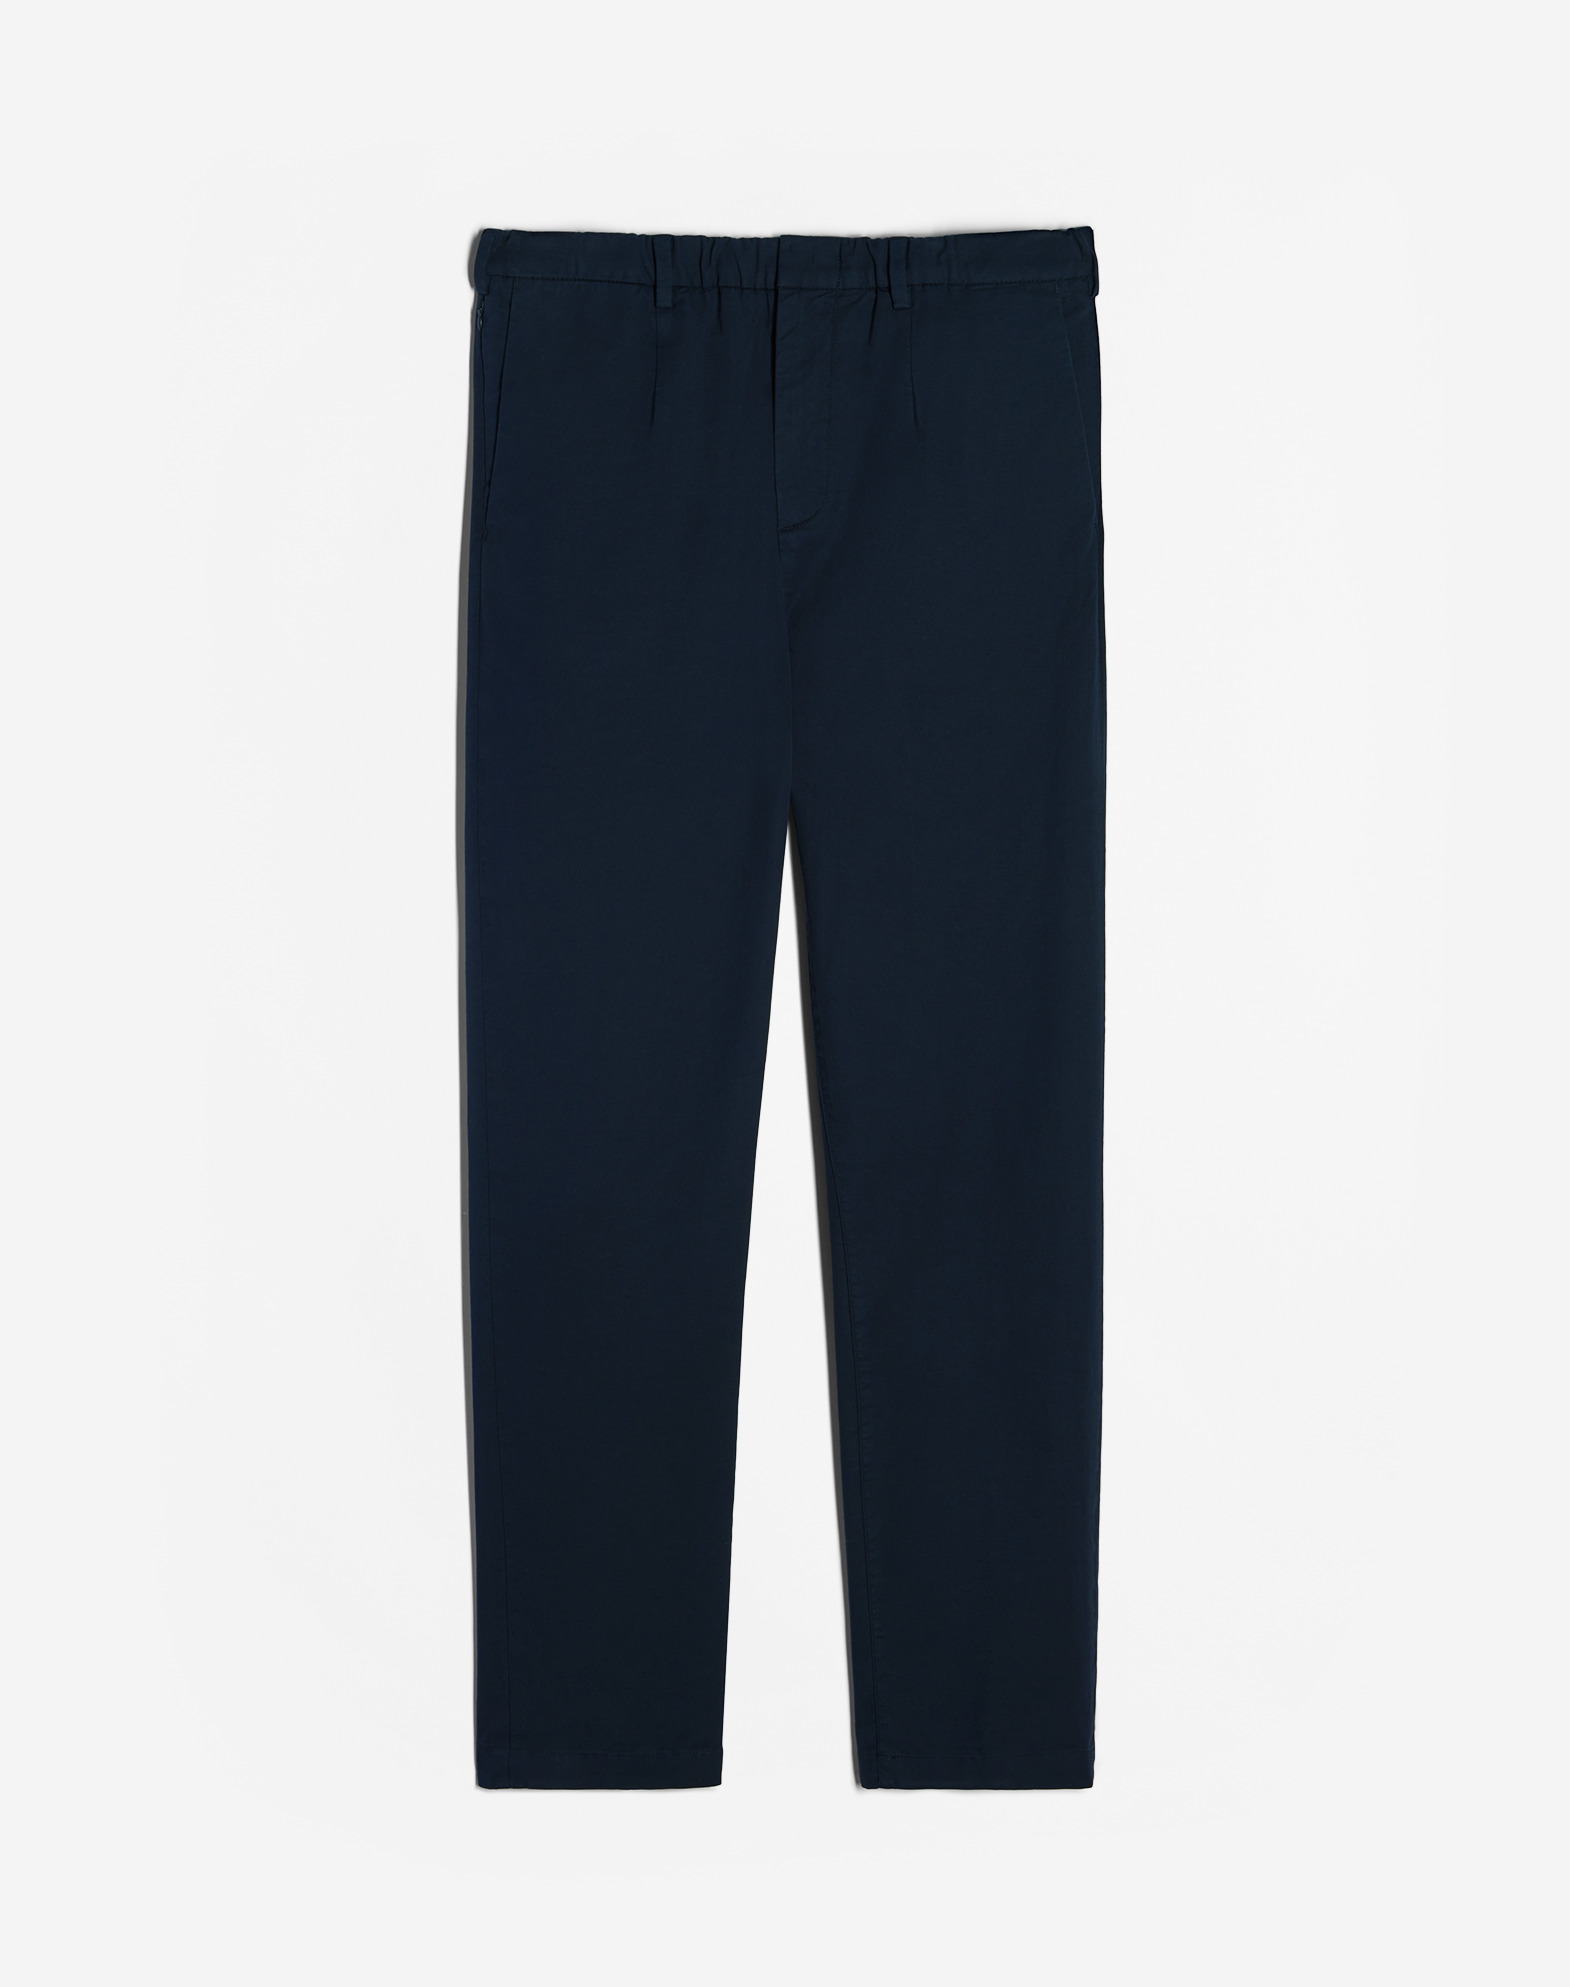 Dunhill Cotton Linen Sports Trouser In Black